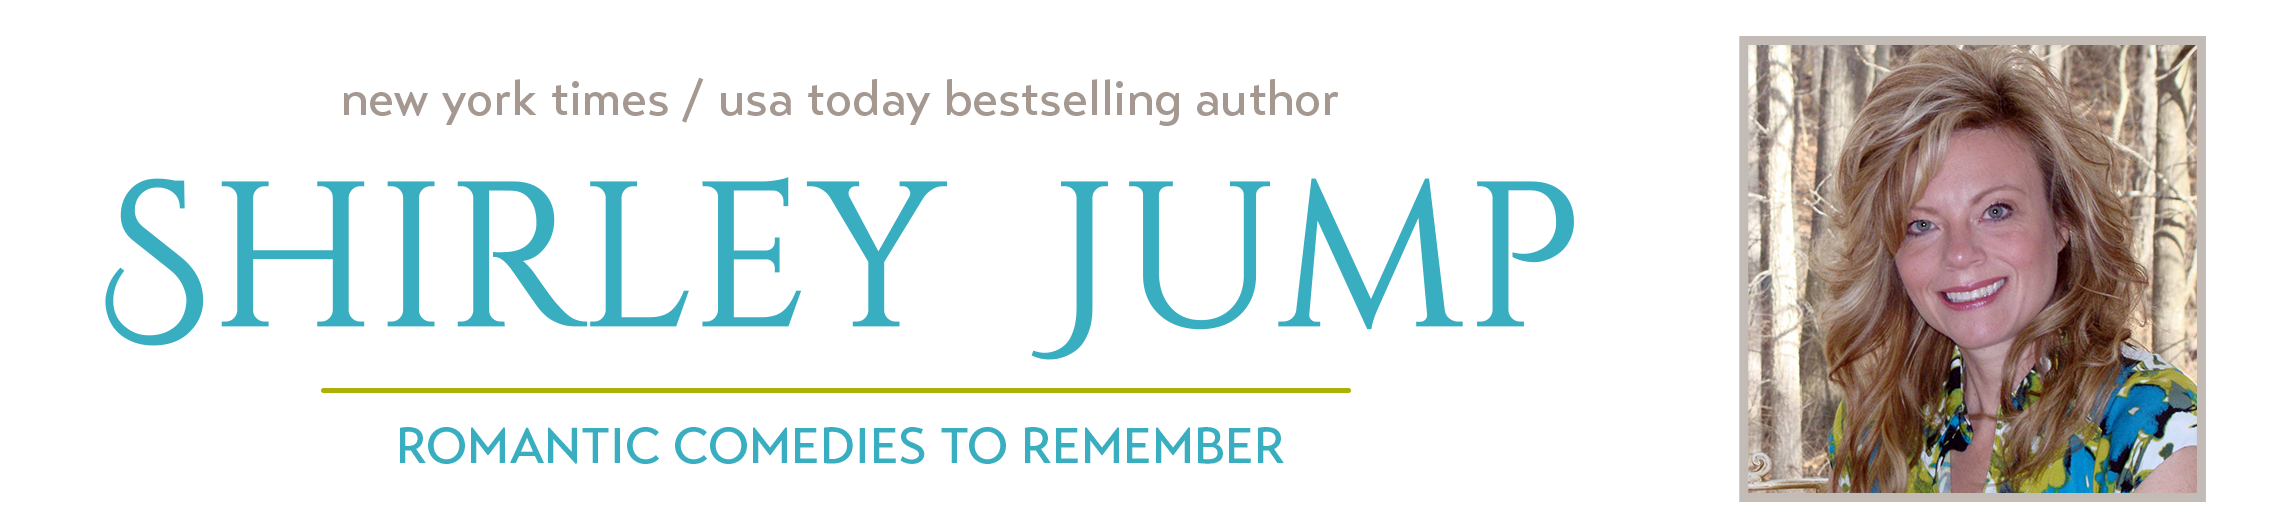 Shirley Jump, New York Times & USA Today Best Selling Author